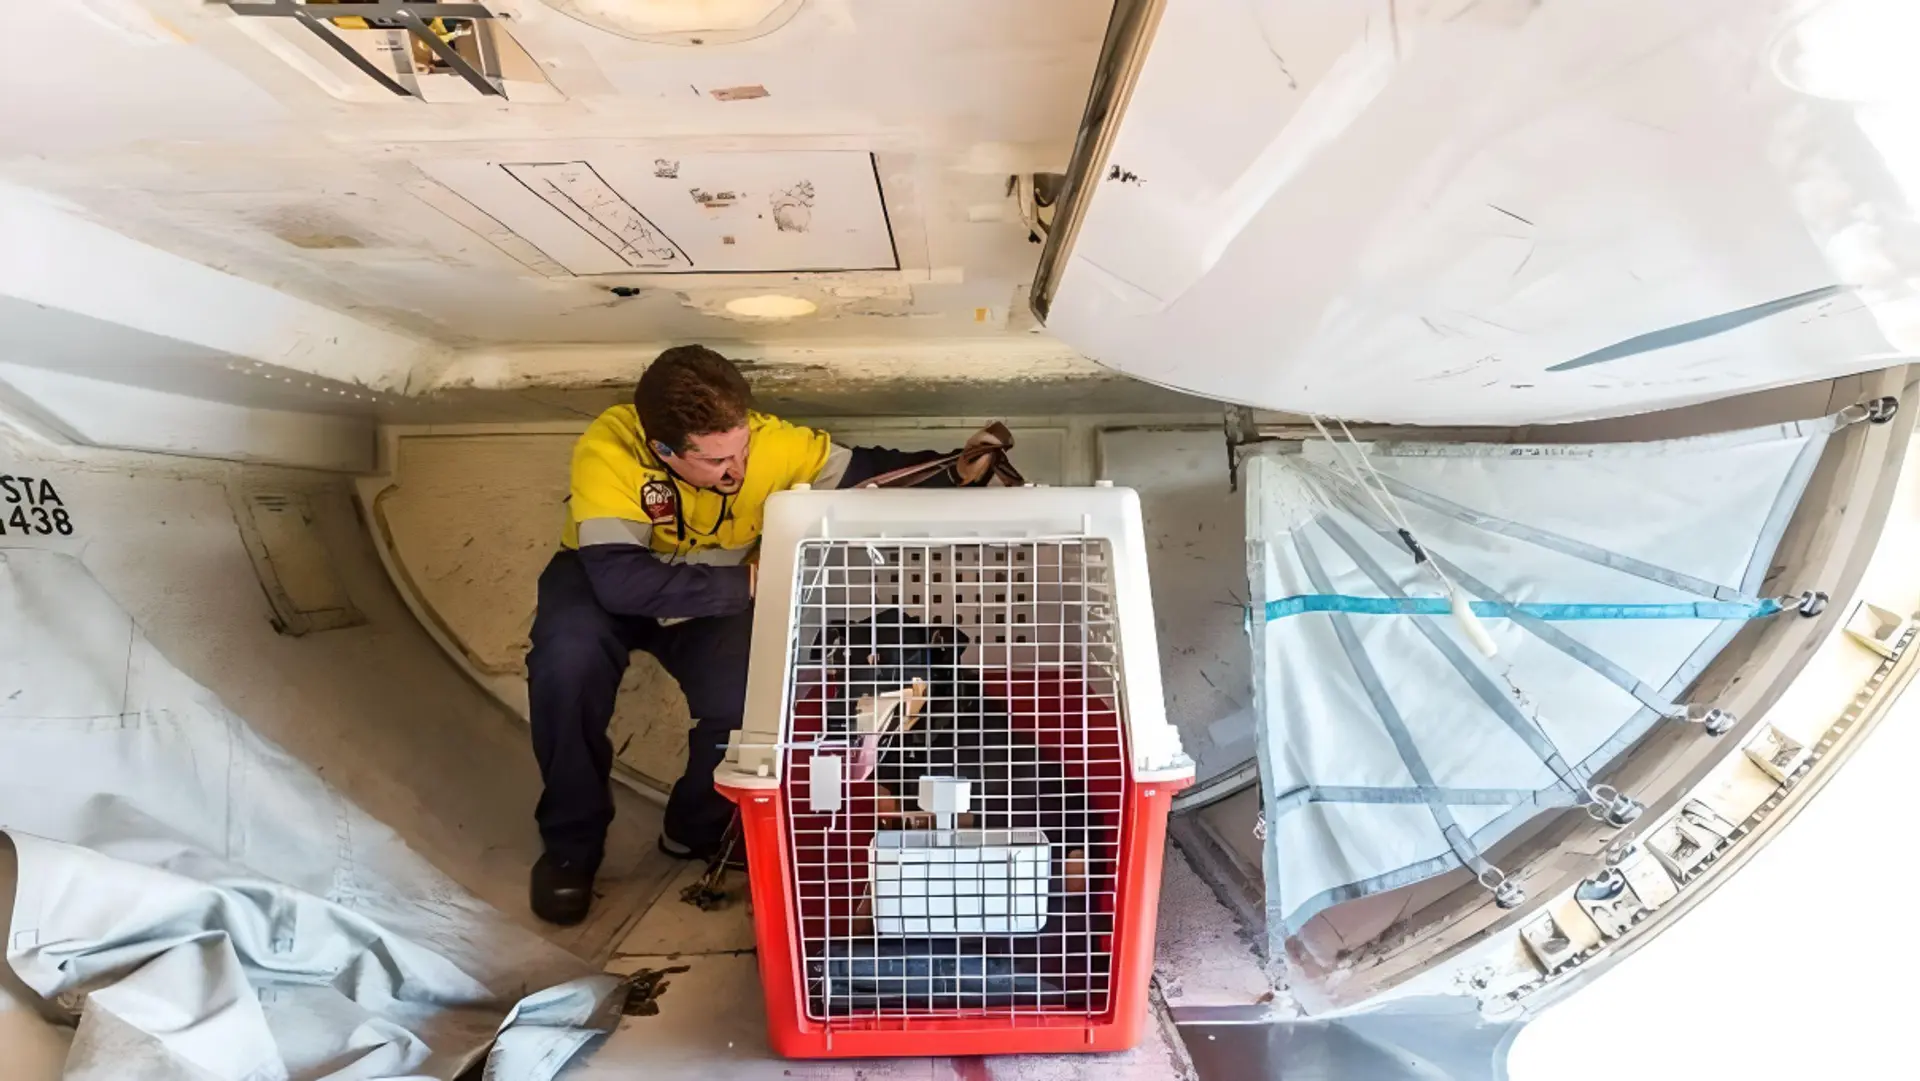 Employee at the aircraft takes care of passengers pet